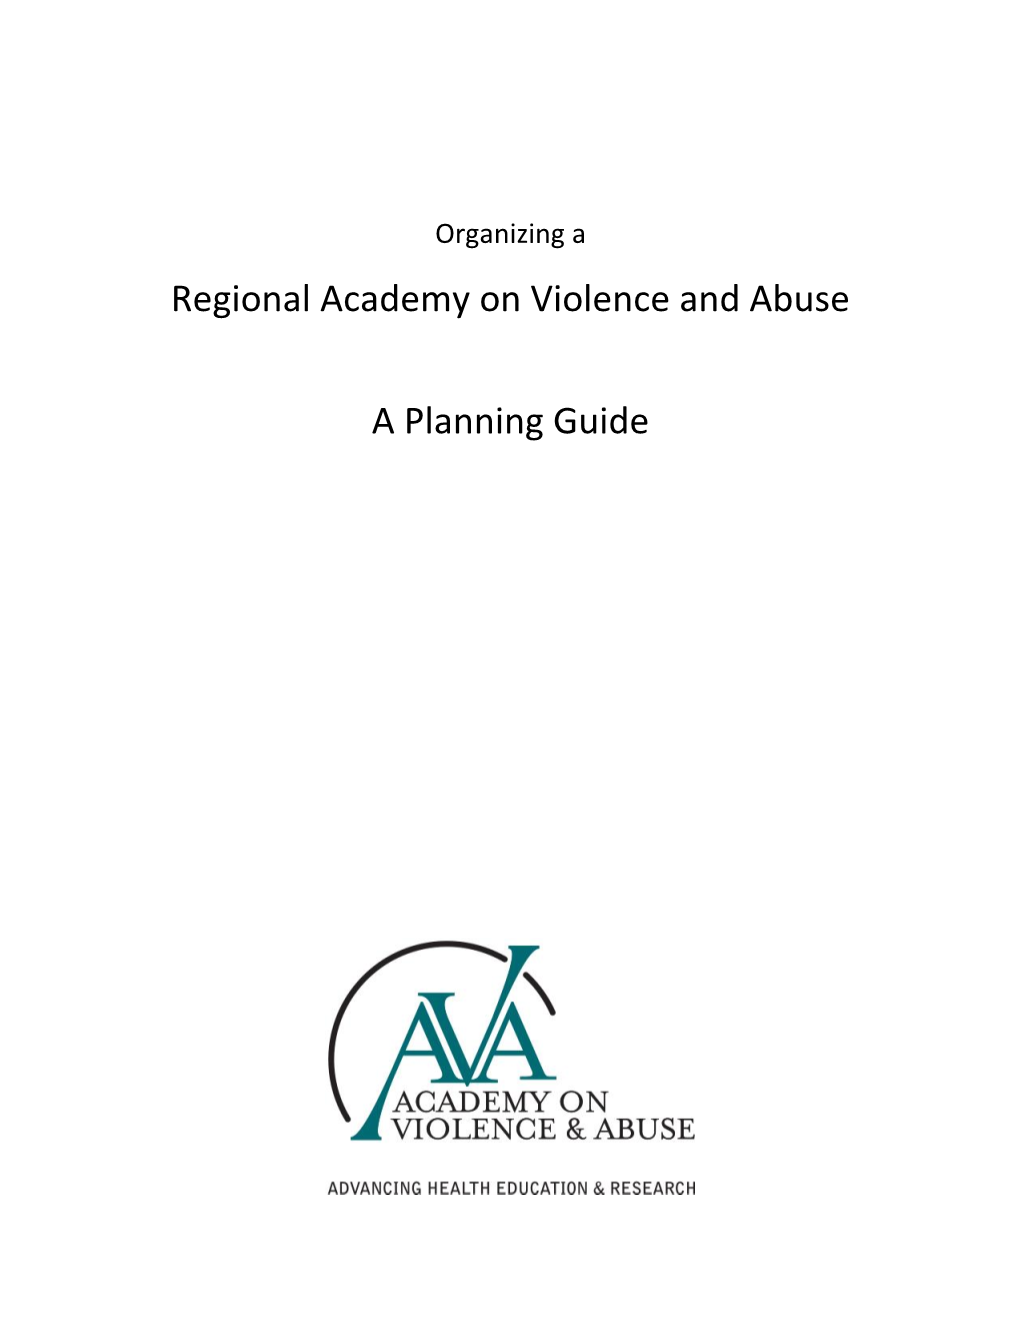 Regional Academy on Violence and Abuse a Planning Guide